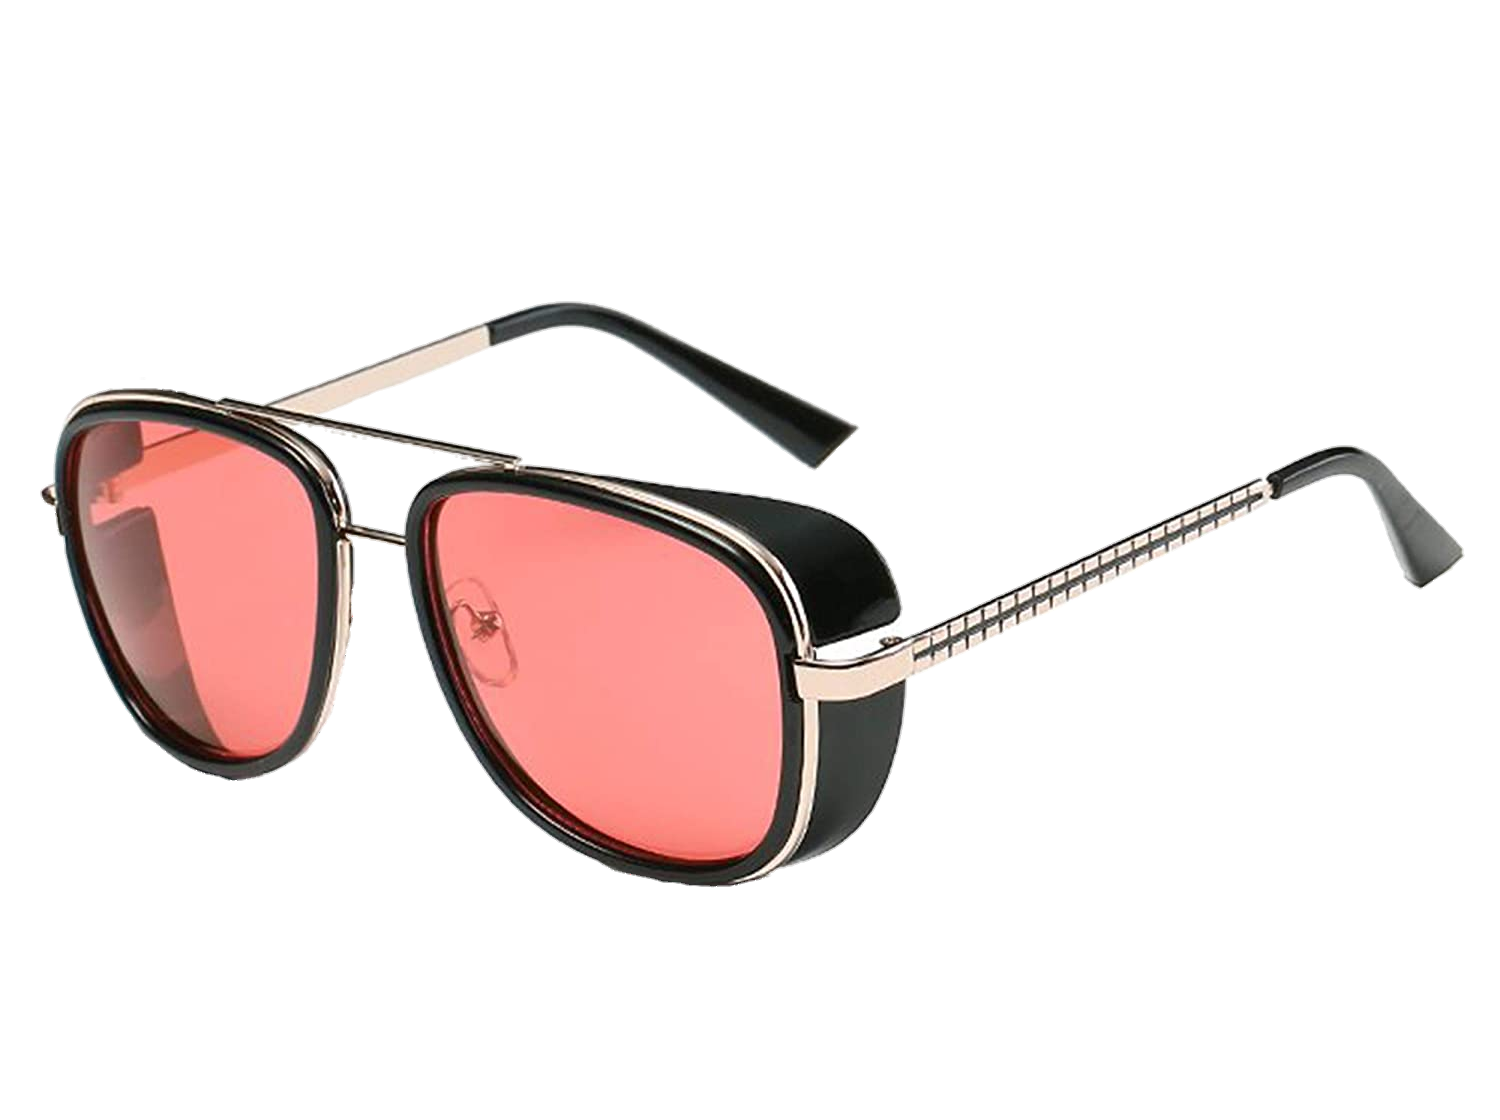 sunglasses-png-from-pngfre-7